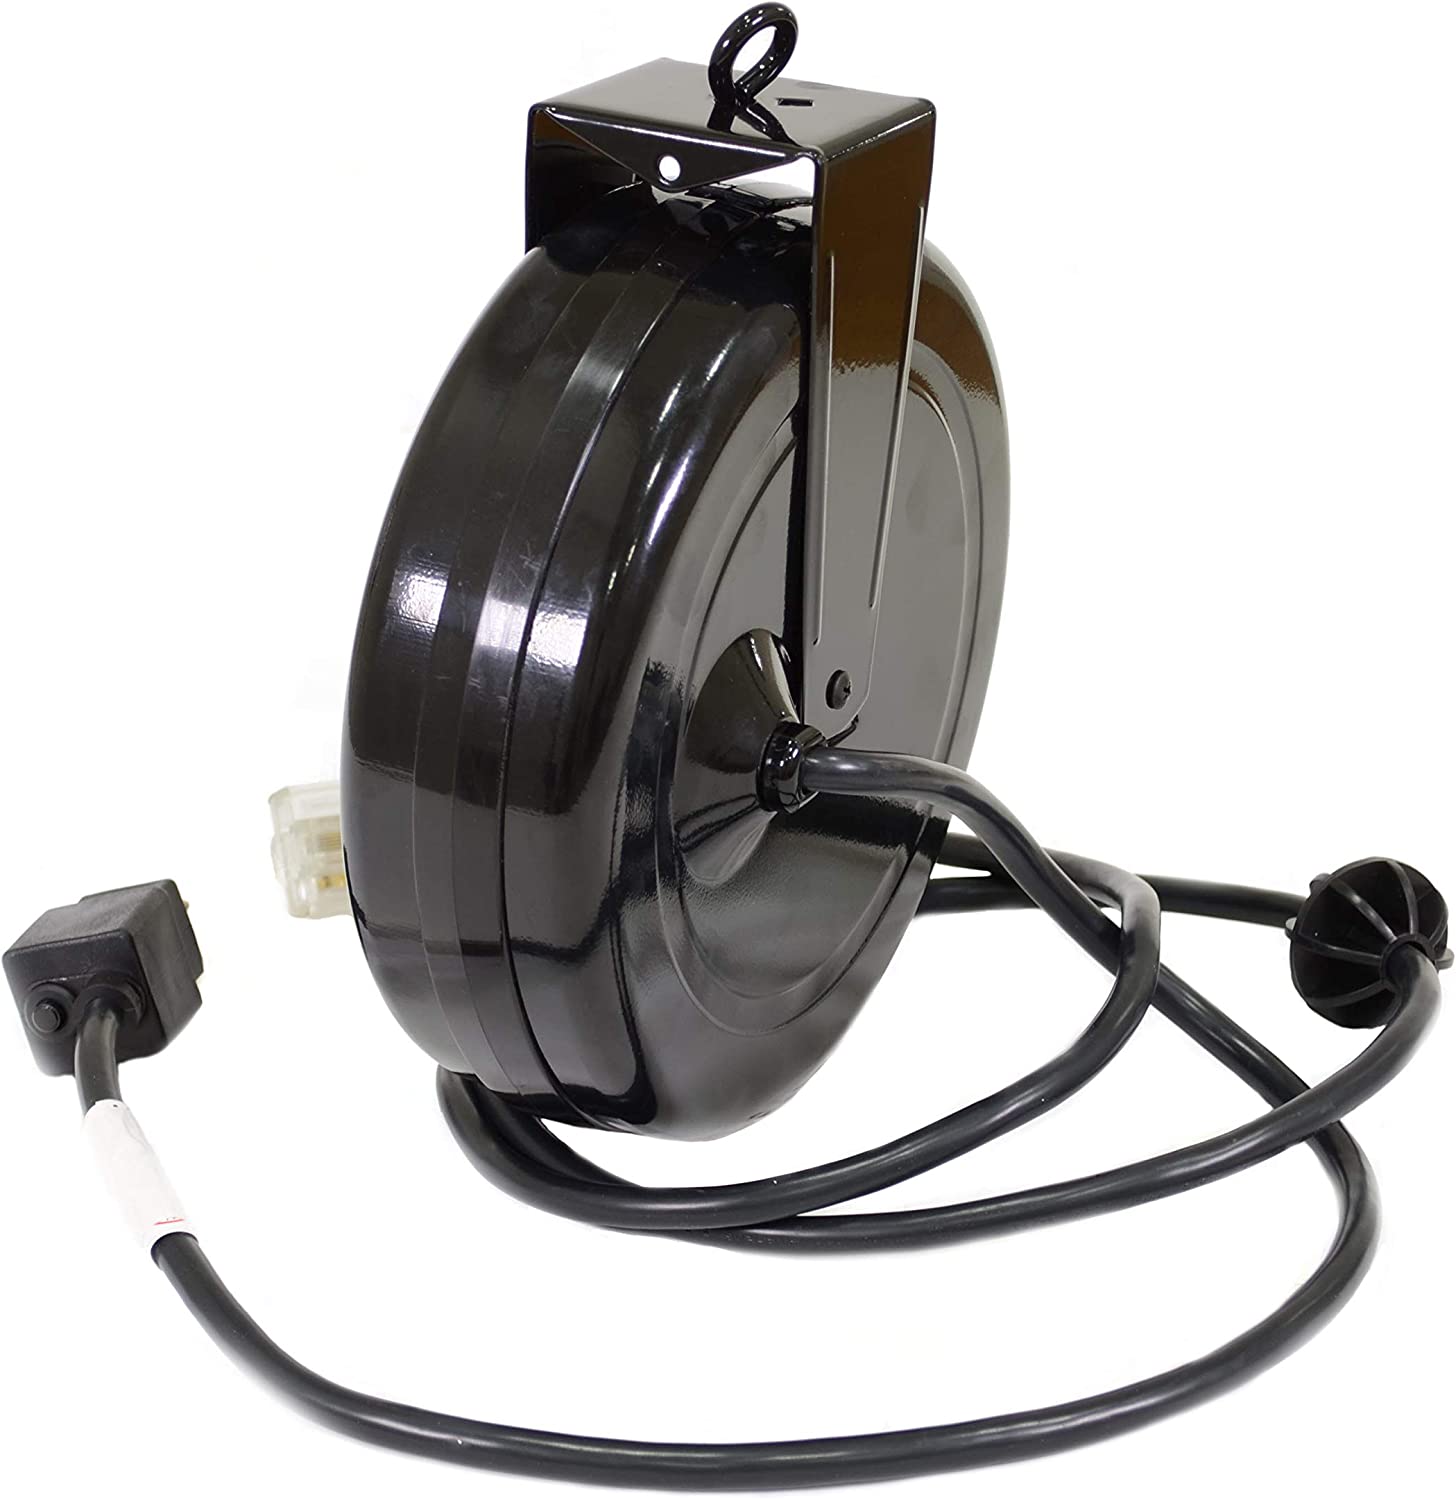 Alert Stamping 8665TFS Heavy Duty 12/3 65 Foot Single Tap Industrial  Retractable Extension Cord Reel